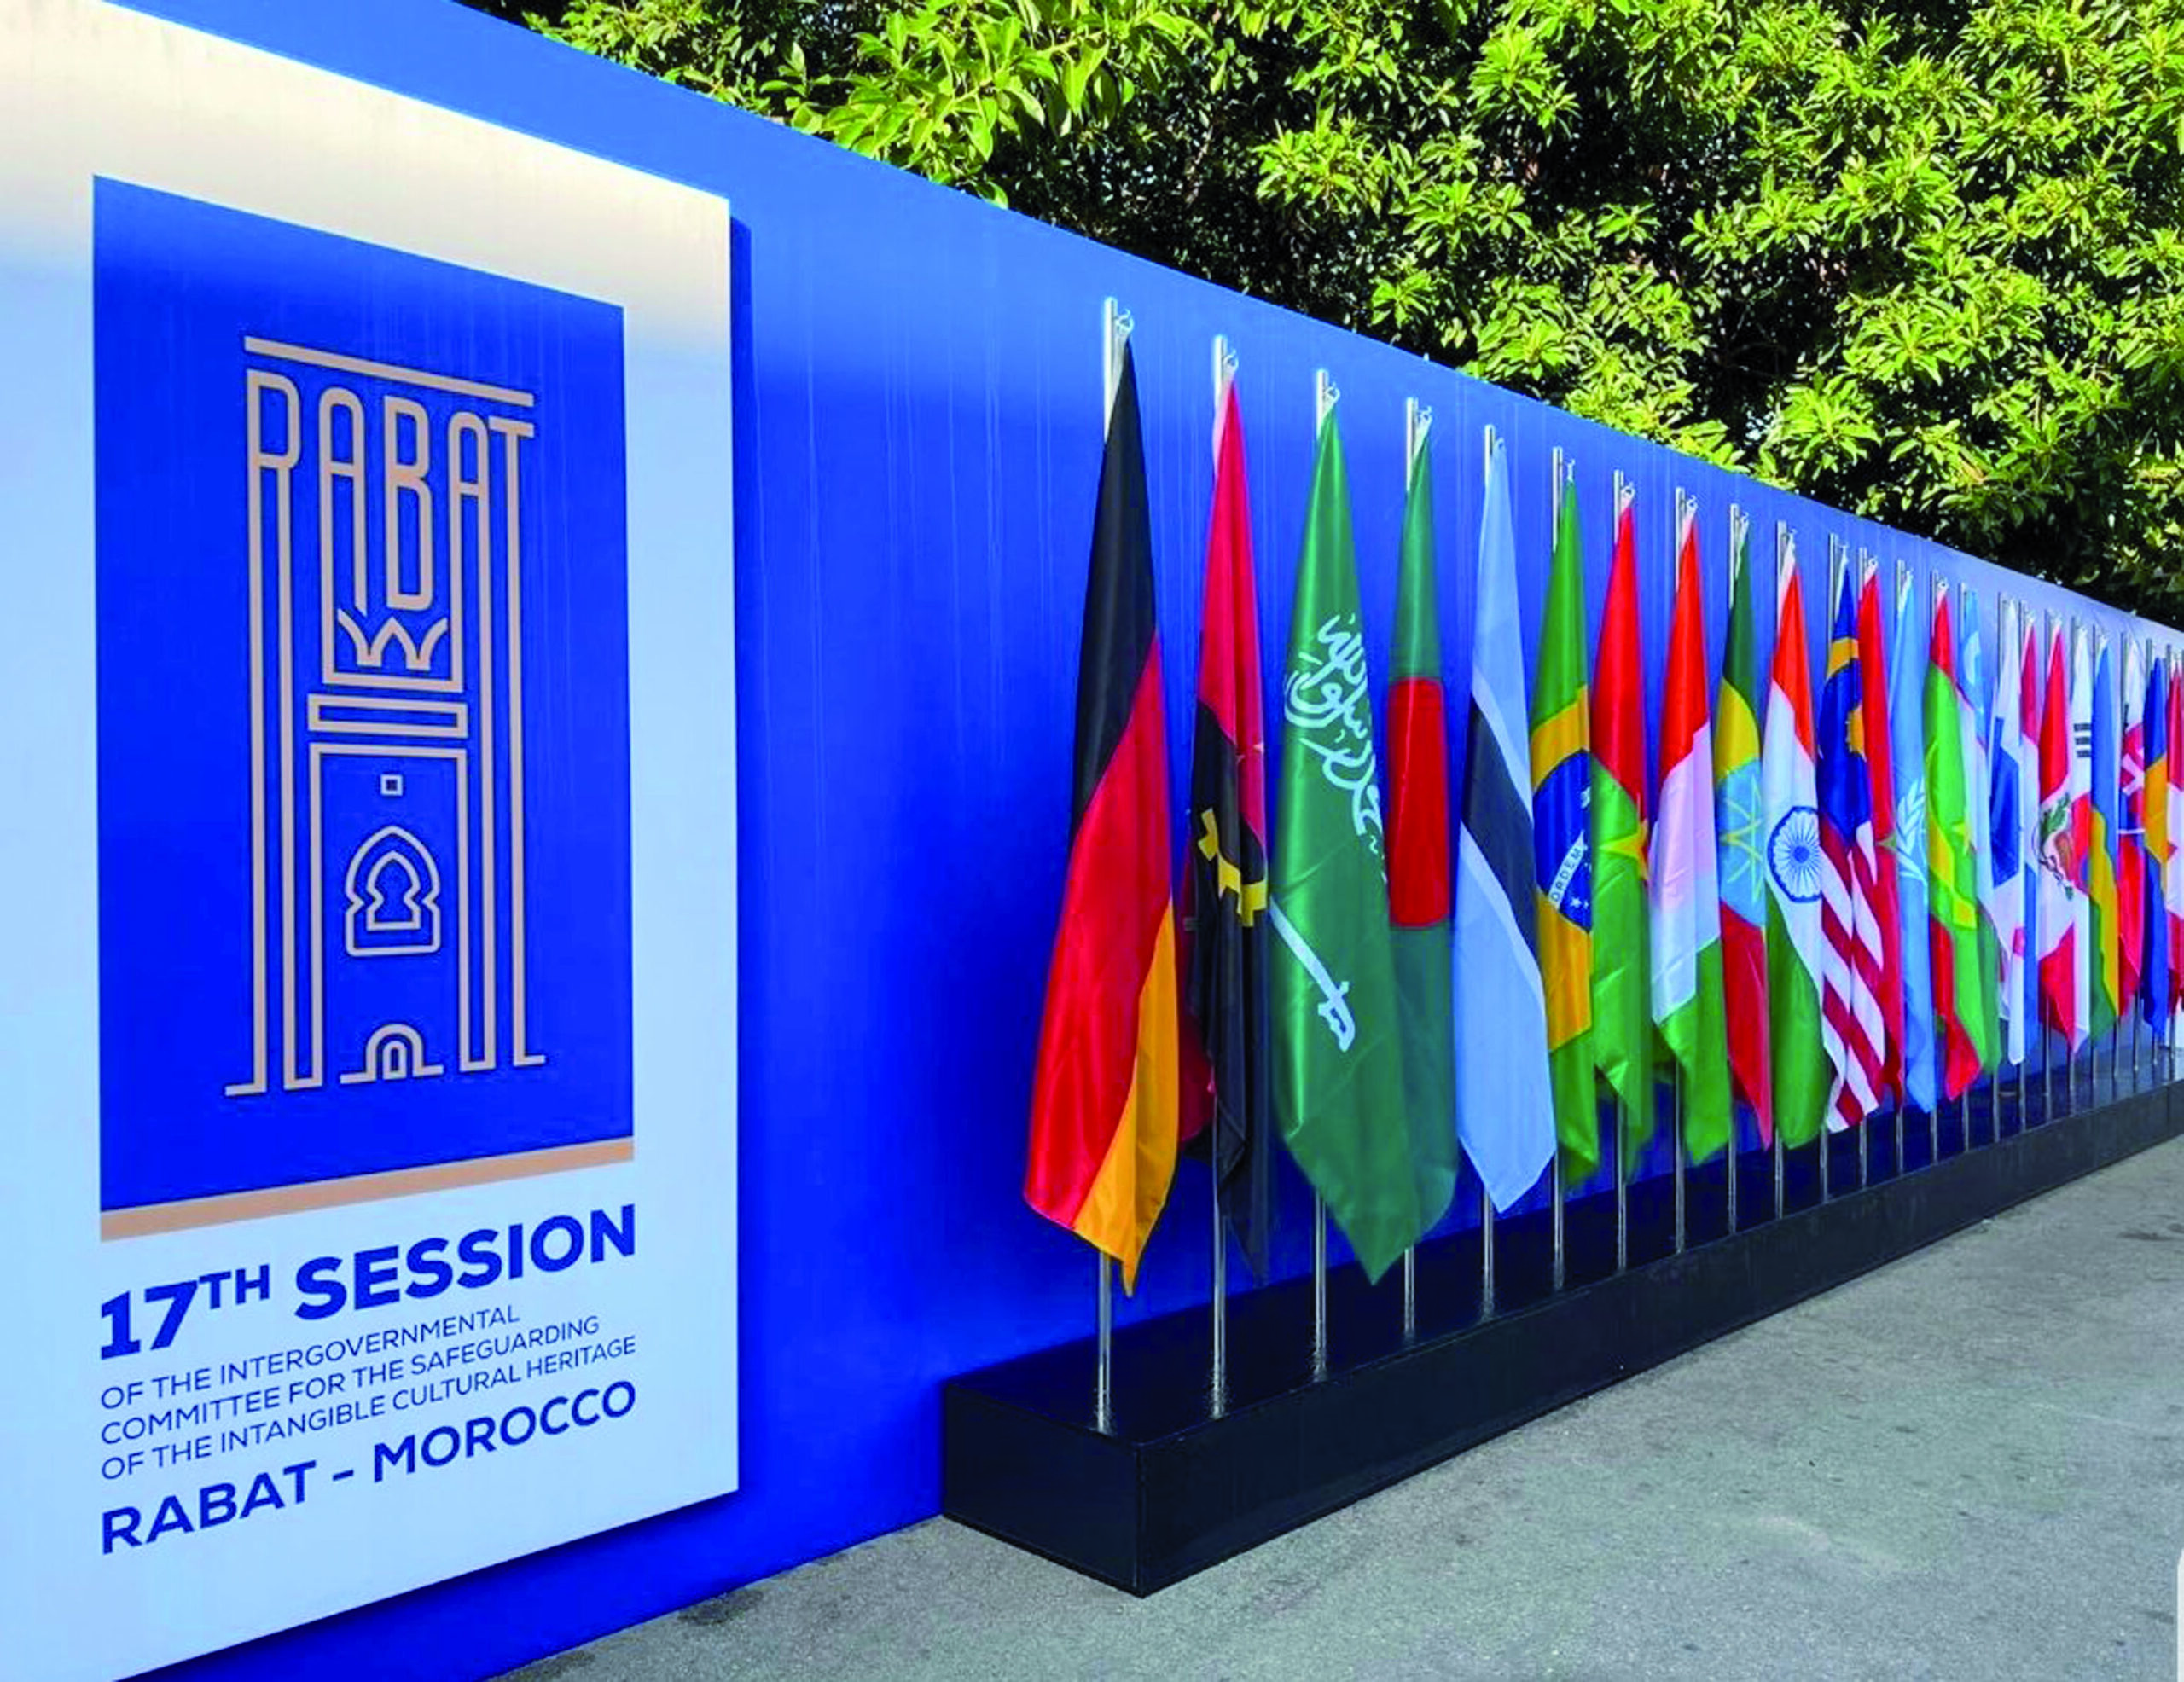 RABAT HOSTS THE 17TH UNESCO SESSION OF THE INTERGOVERNMENTAL COMMITTEE FOR THE SAFEGUARDING OF THE INTANGIBLE CULTURAL HERITAGE. ITS WAS THE GREATEST INTERNATIONAL CULTURAL EVENT IN AFRICA IN 2022